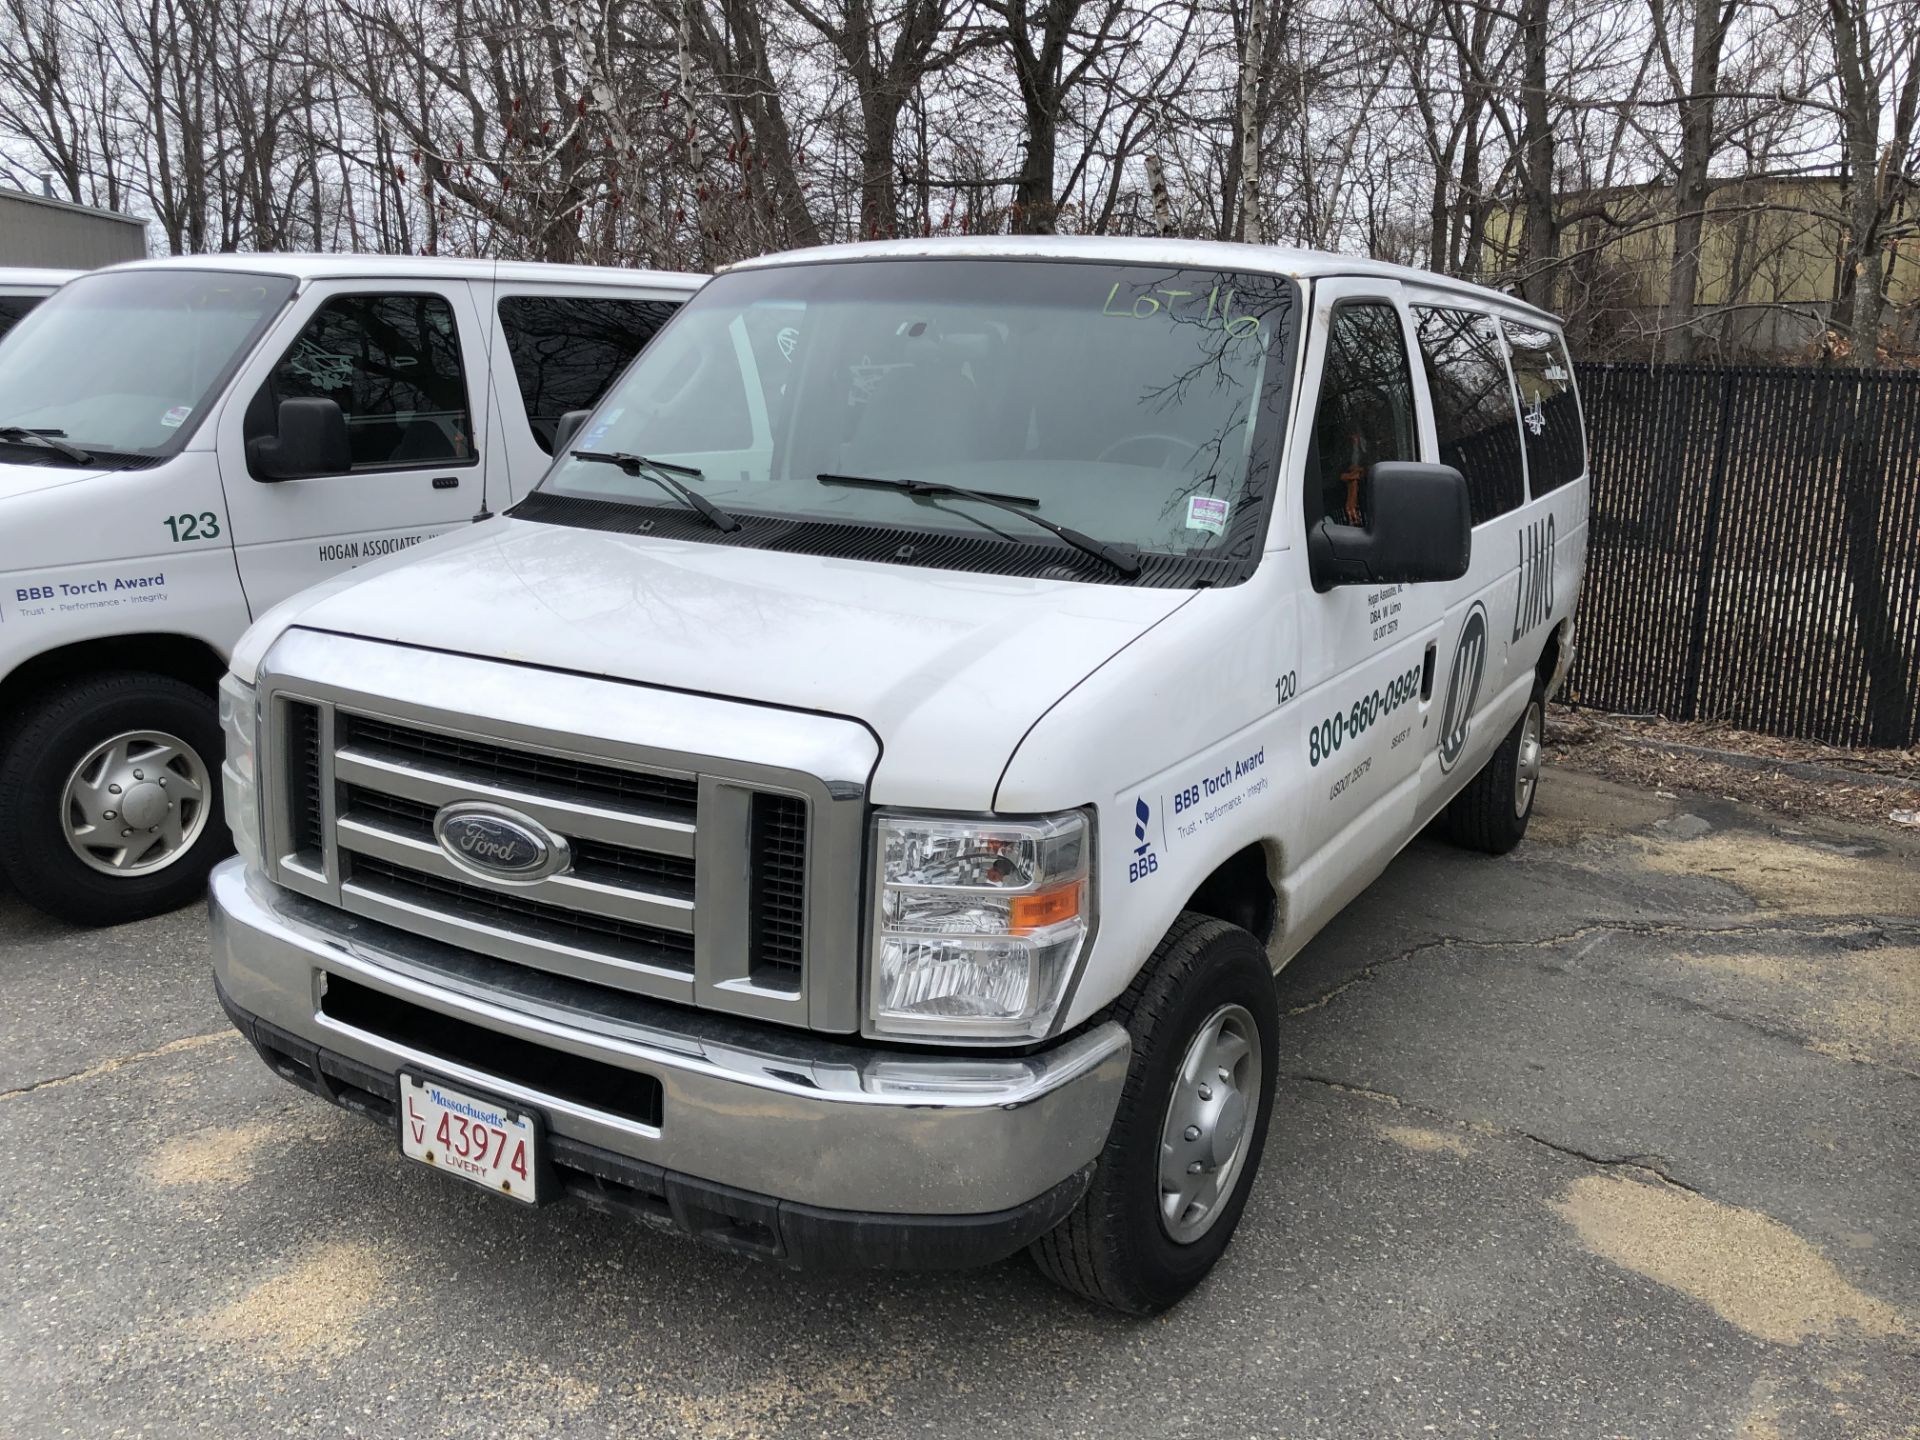 2008 Ford E-350 11 Passenger Van, 5.4L V8 RWD, Automatic, Front & Rear A/C, Odom: 675,000 Approx.